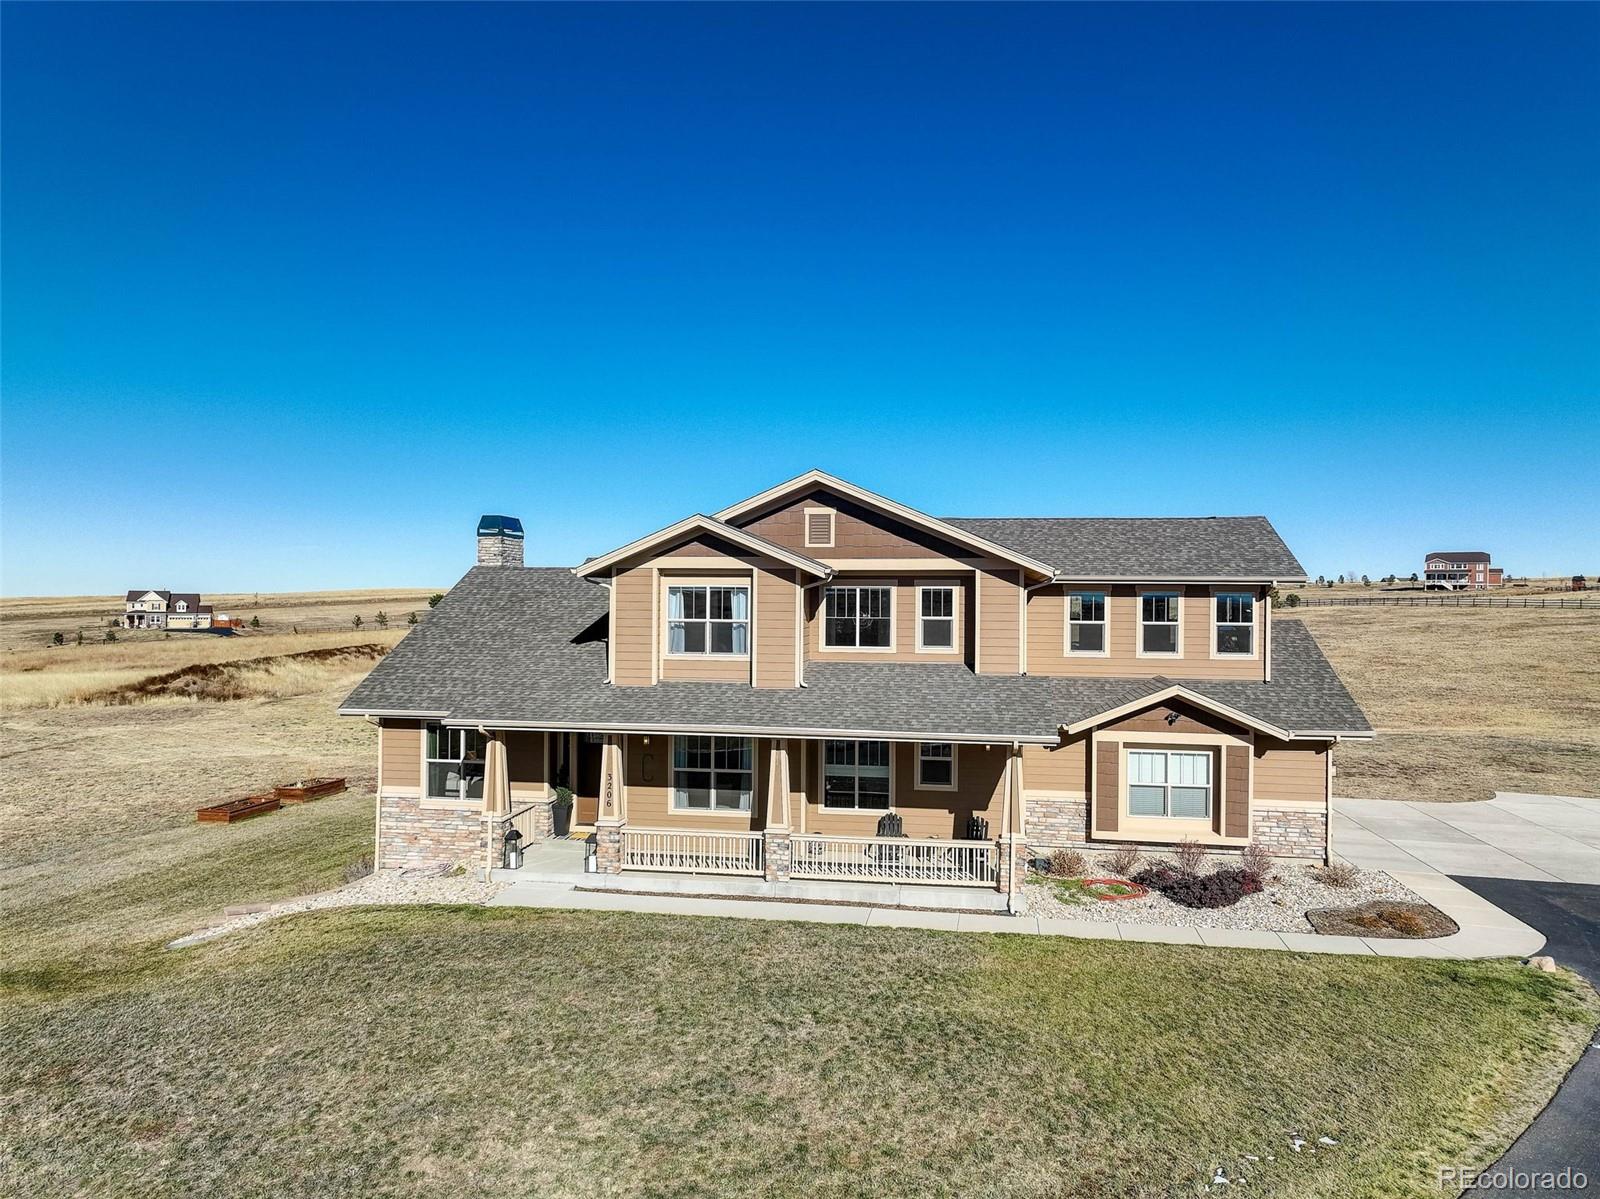 3206  antelope ridge trail, parker sold home. Closed on 2024-02-15 for $1,100,000.